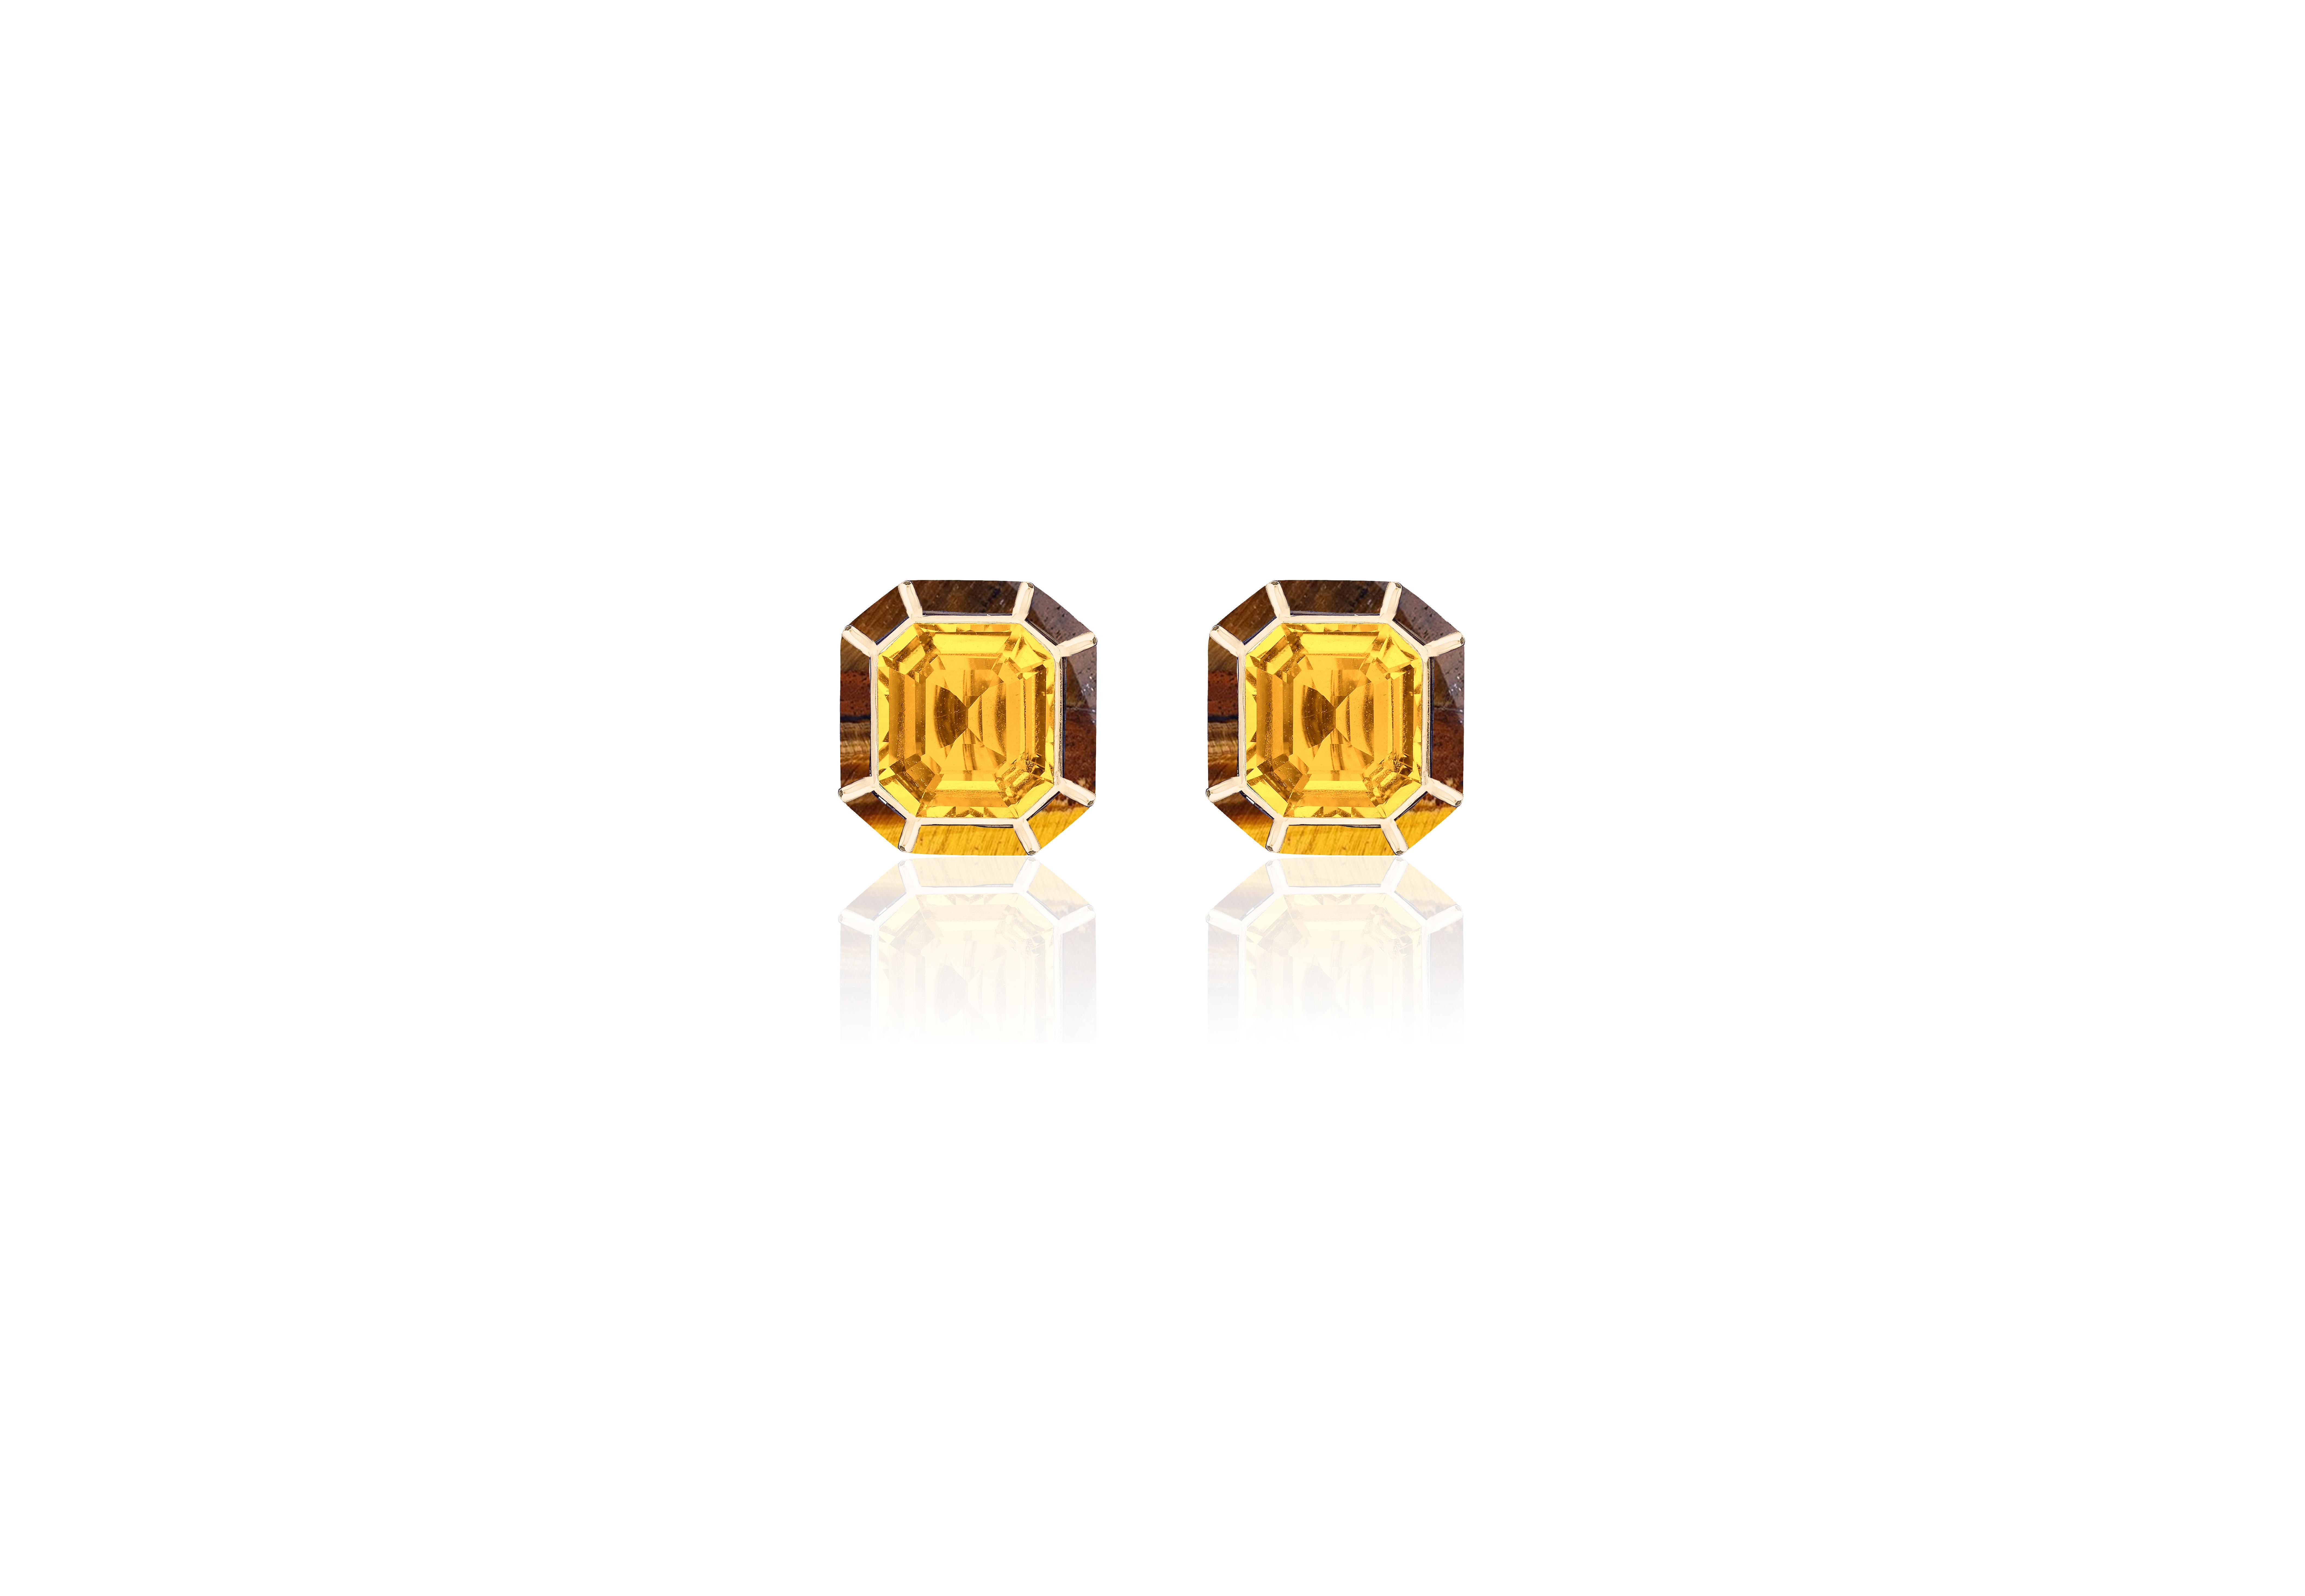 The Citrine & Tiger's Eye Stud Earrings from the 'Melange' Collection showcase a captivating blend of elegance and charm. Crafted with exquisite attention to detail, these earrings feature stunning emerald cut Citrine and Tiger's Eye gemstones set